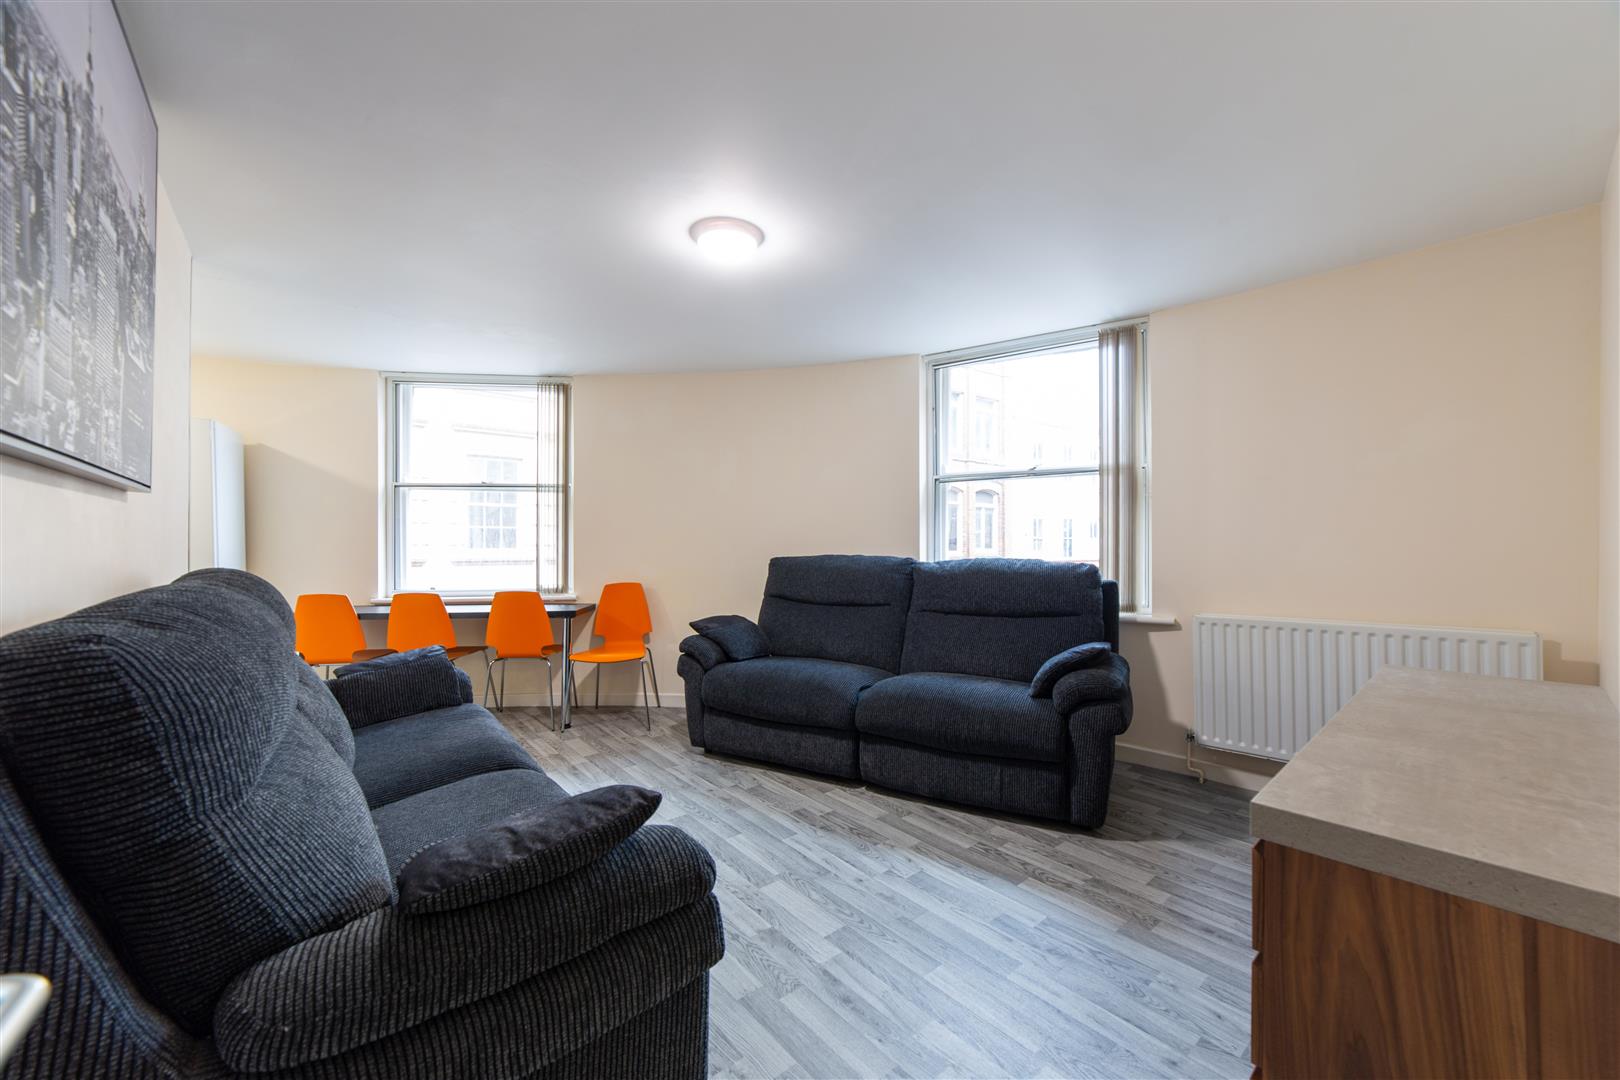 4 bed apartment to rent in Fenkle Street, City Centre, NE1 